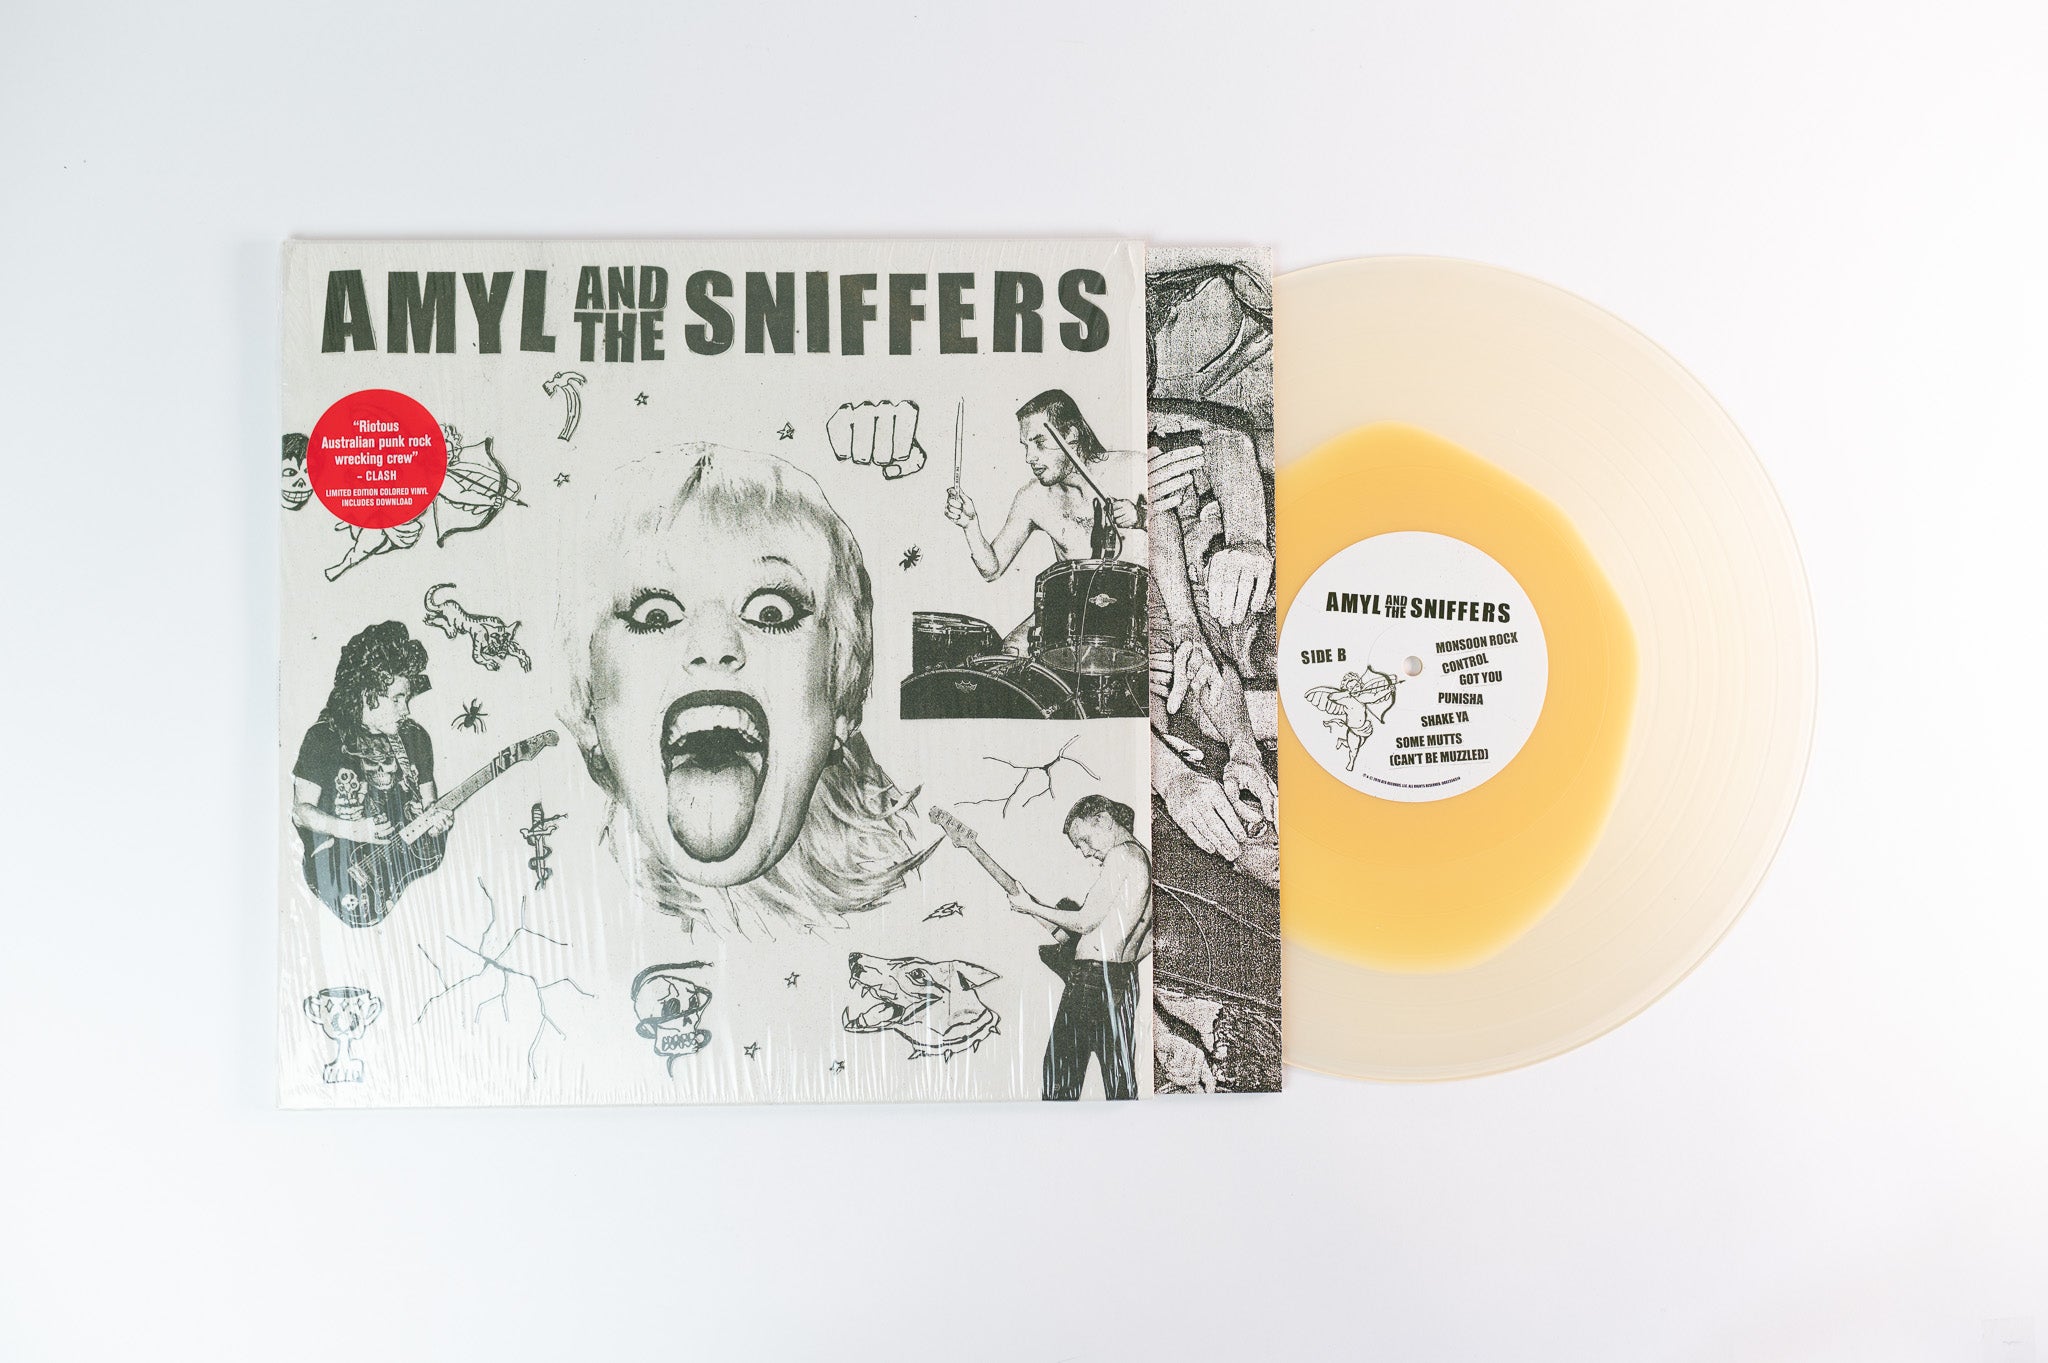 Amyl And The Sniffers - Amyl And The Sniffers on ATO Ltd Egg Clear with Yellow Blob